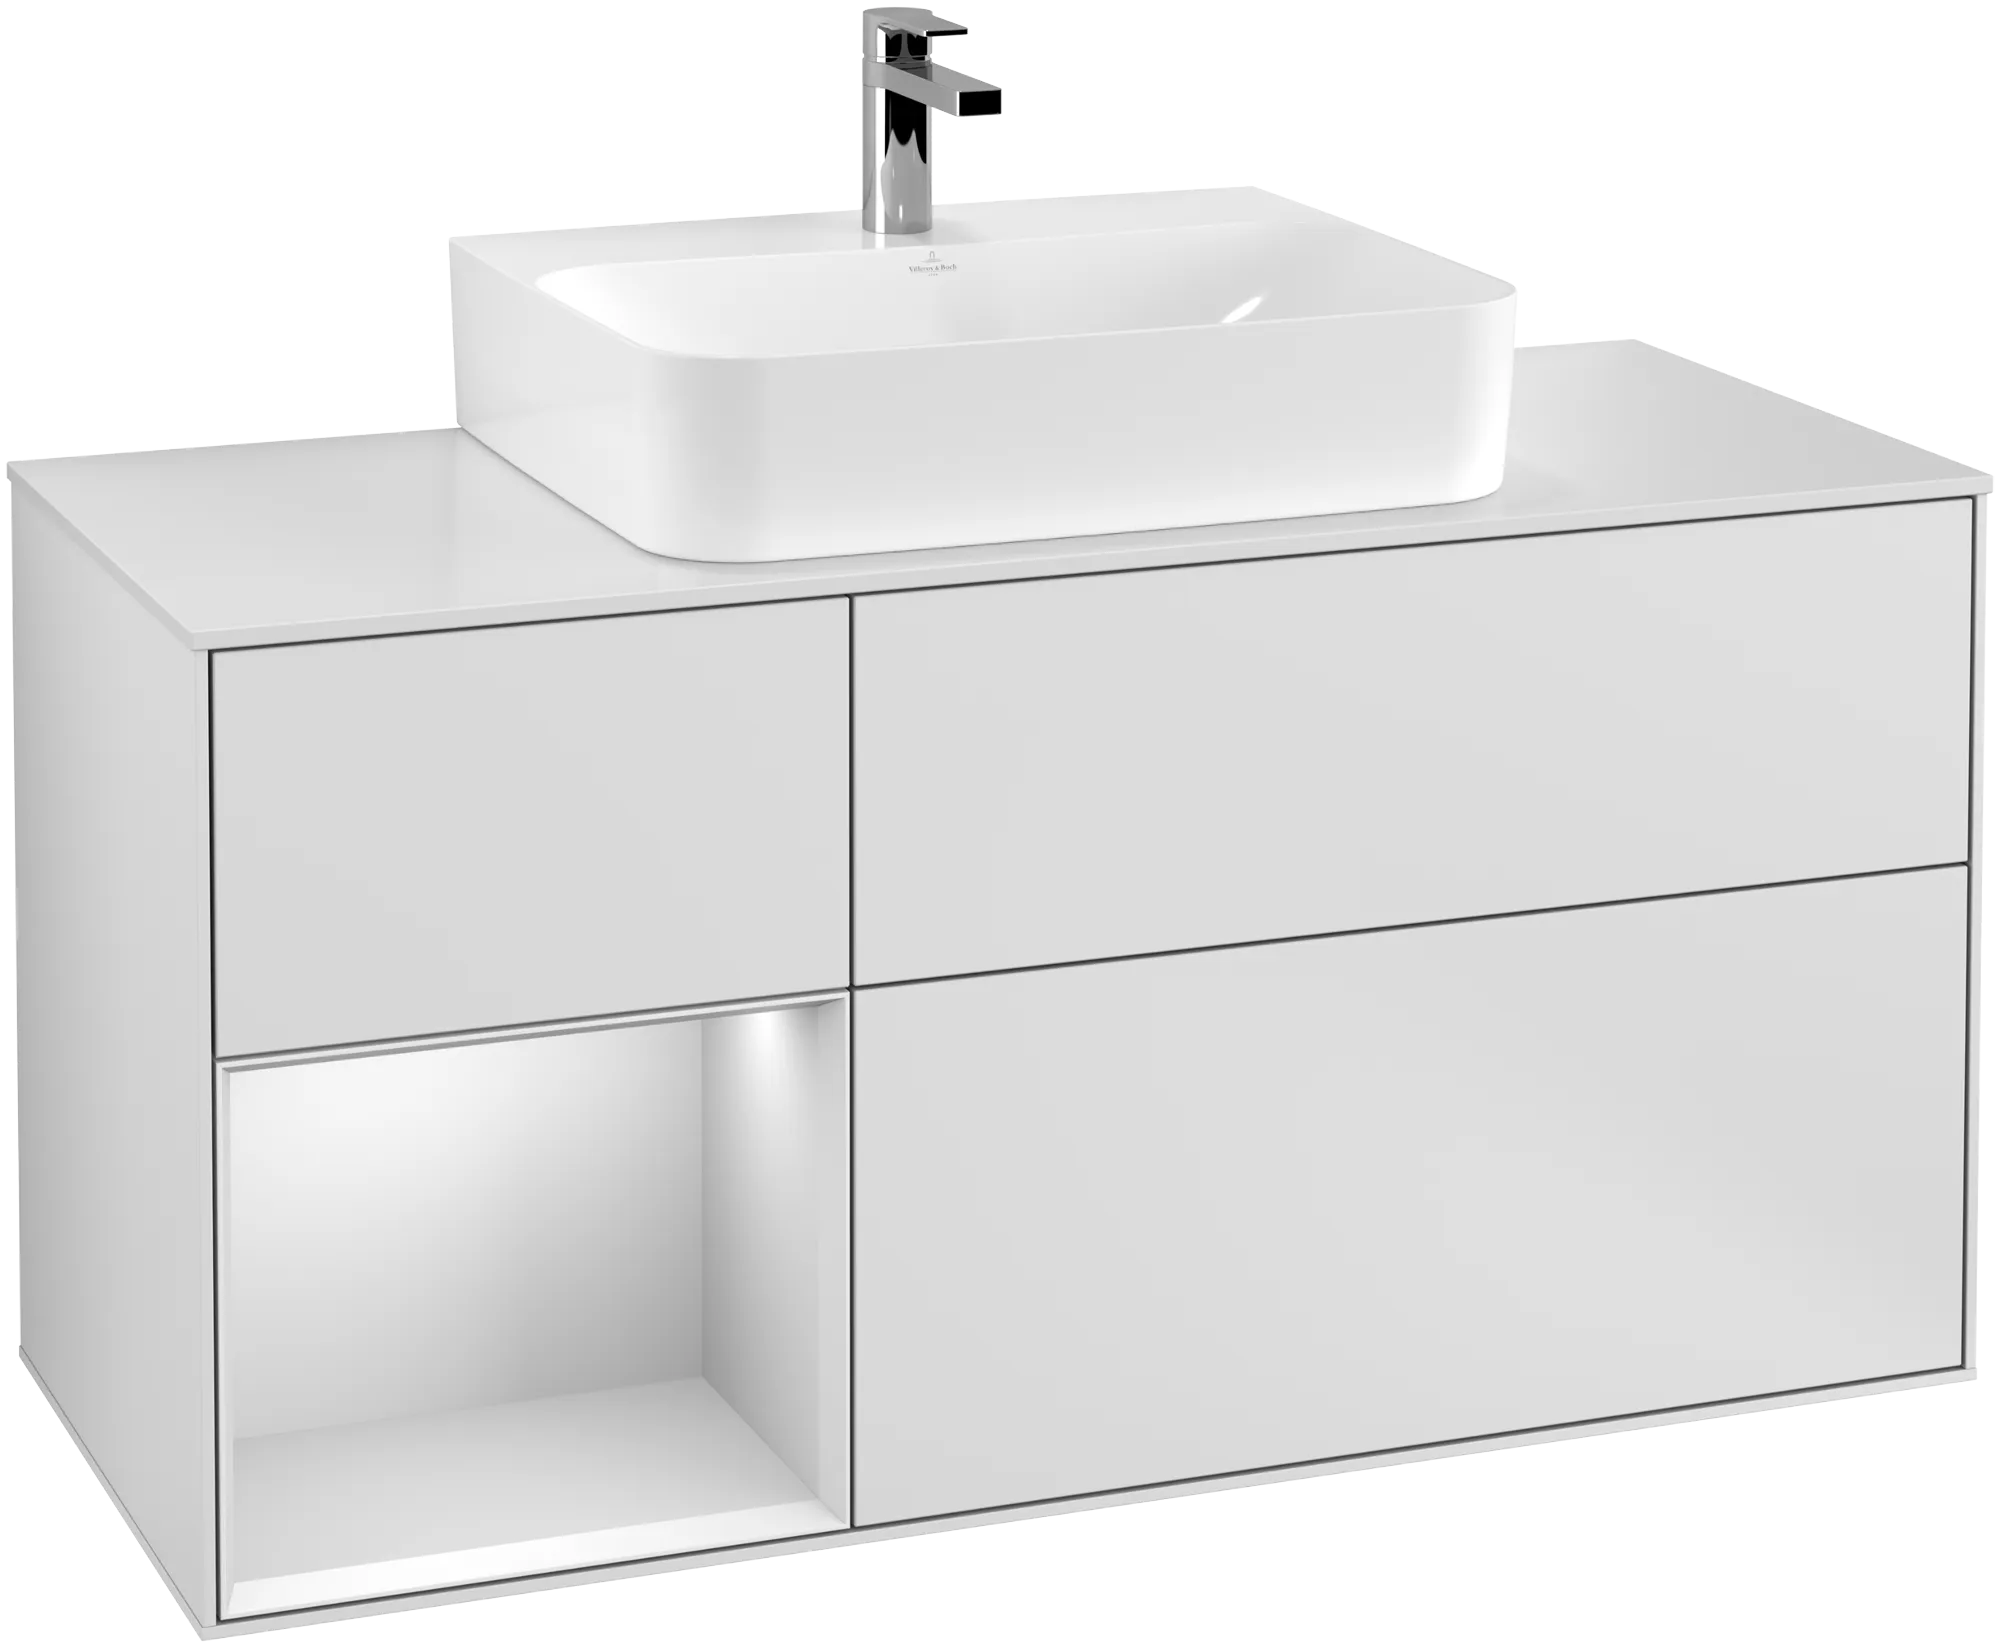 Picture of VILLEROY BOCH Finion Vanity unit, with lighting, 3 pull-out compartments, 1200 x 603 x 501 mm, White Matt Lacquer / White Matt Lacquer / Glass White Matt #G161MTMT